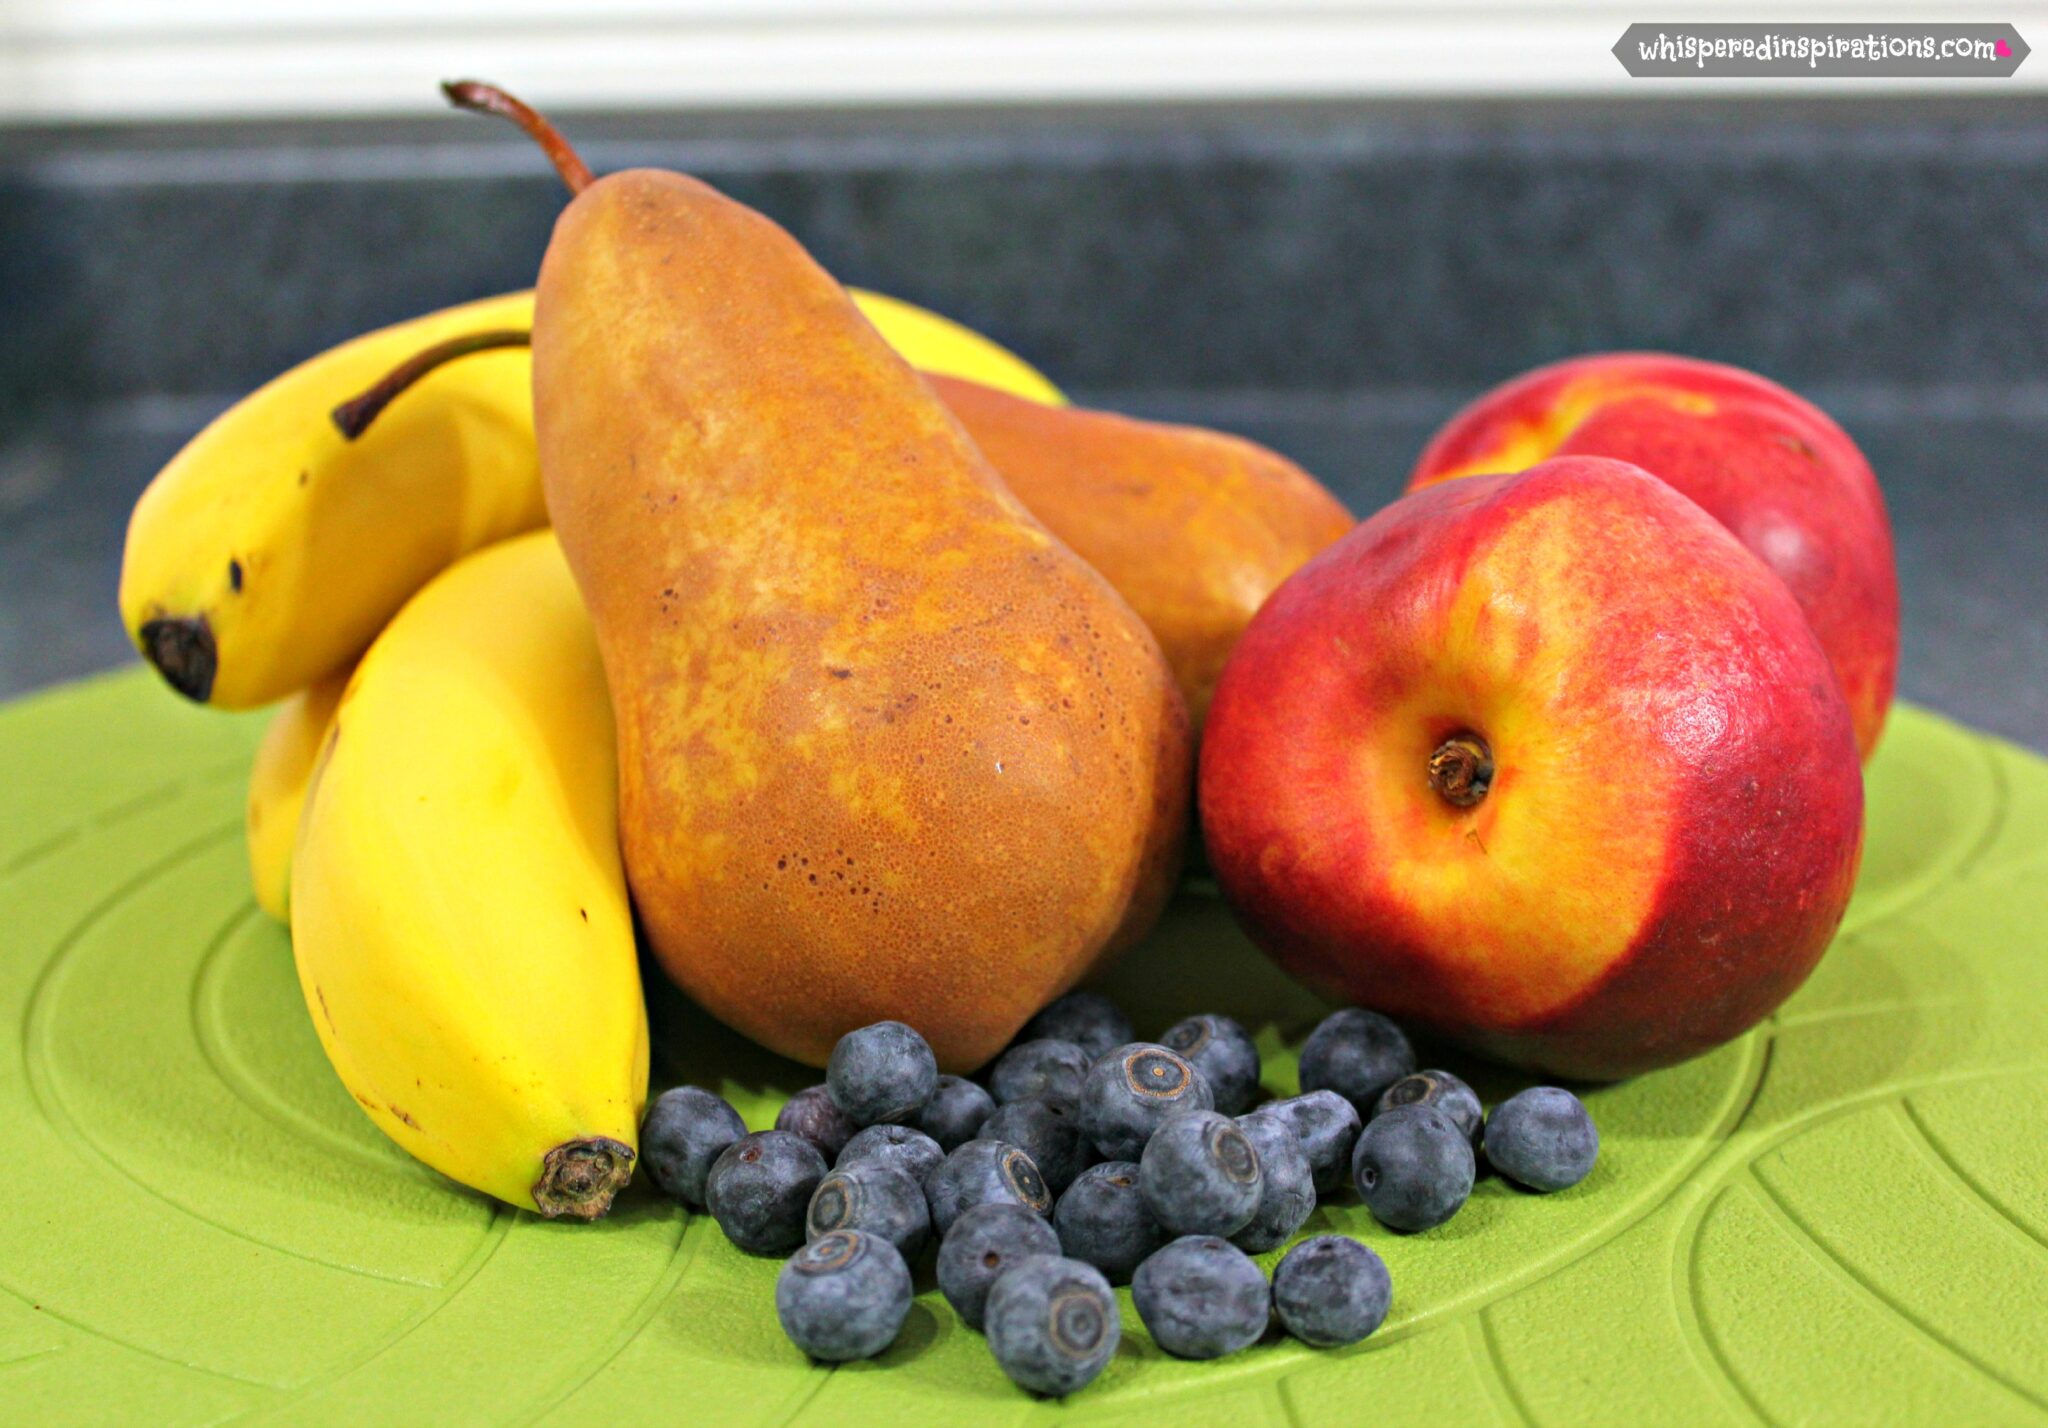 Bananas, pears, peaches, and blueberries are shown and ready to be made into puree.